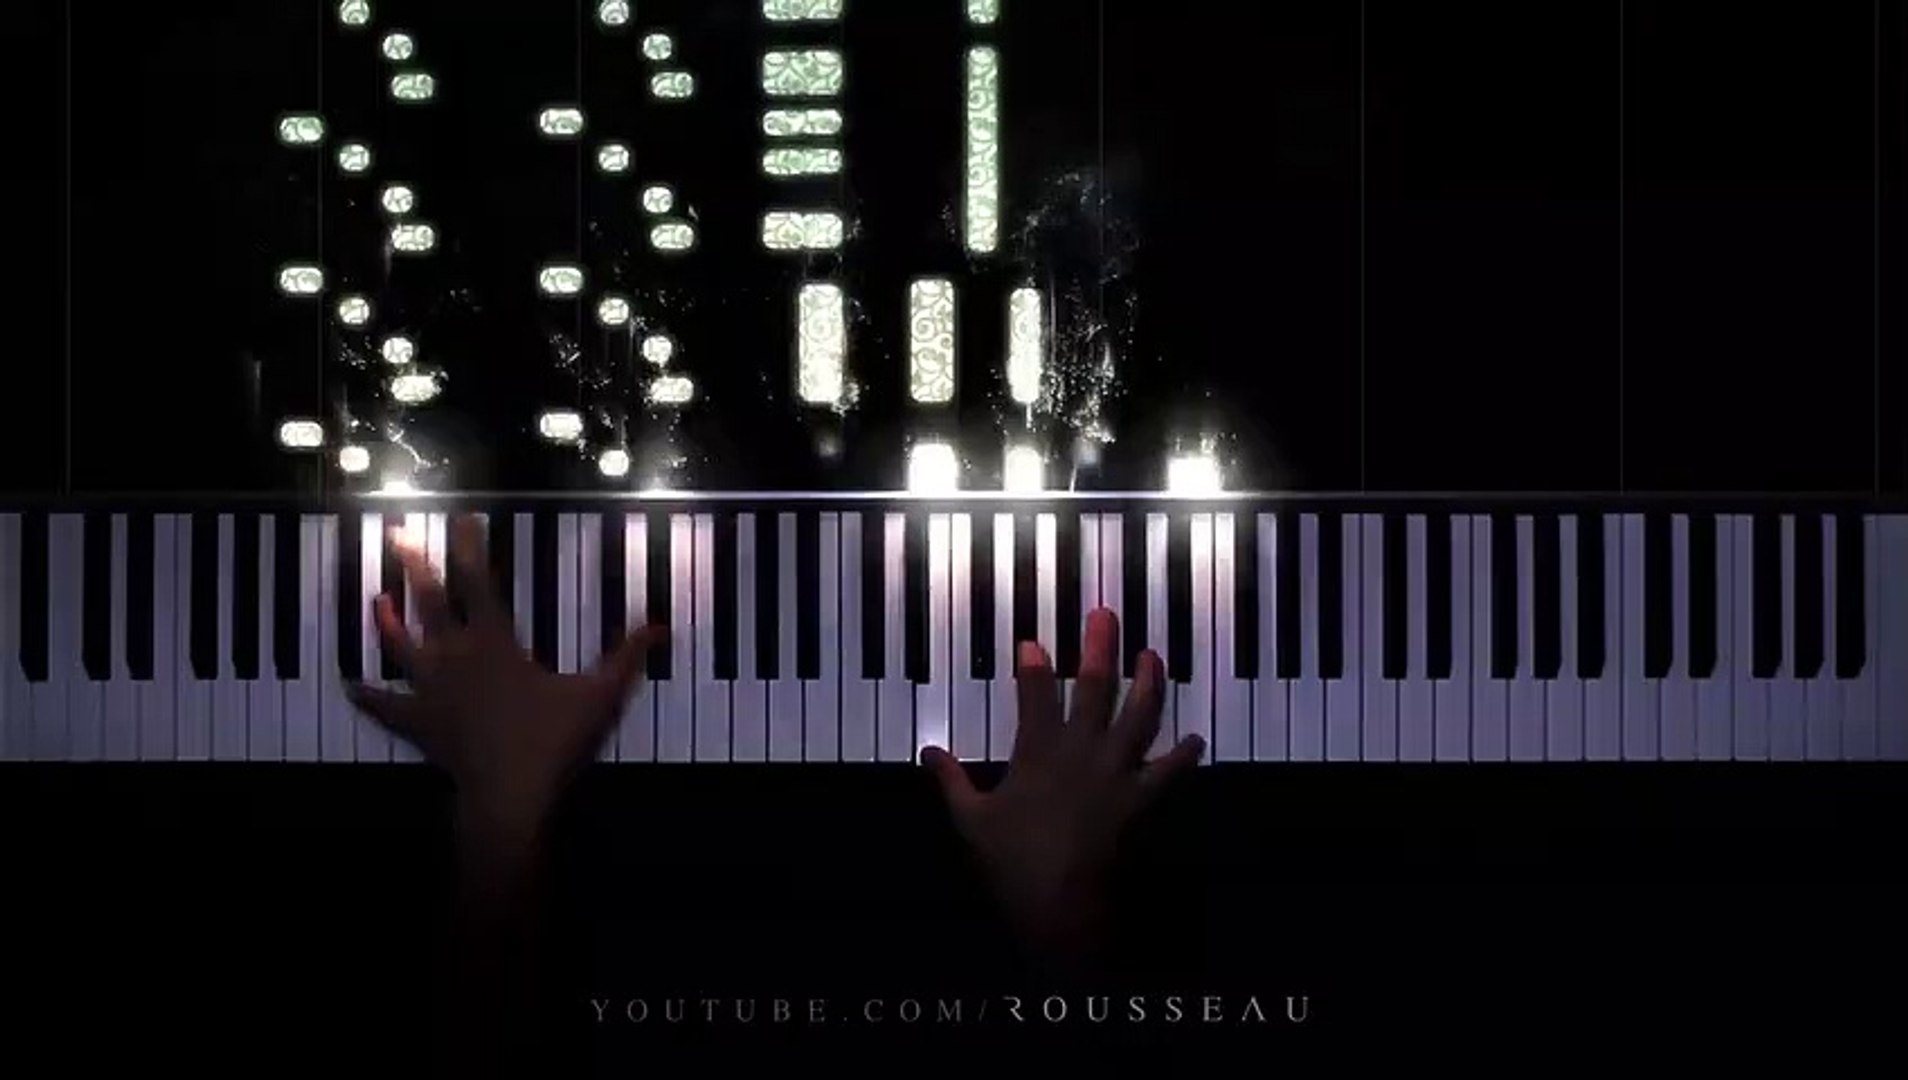 Piano "Rousseau" by Carsel - Dailymotion